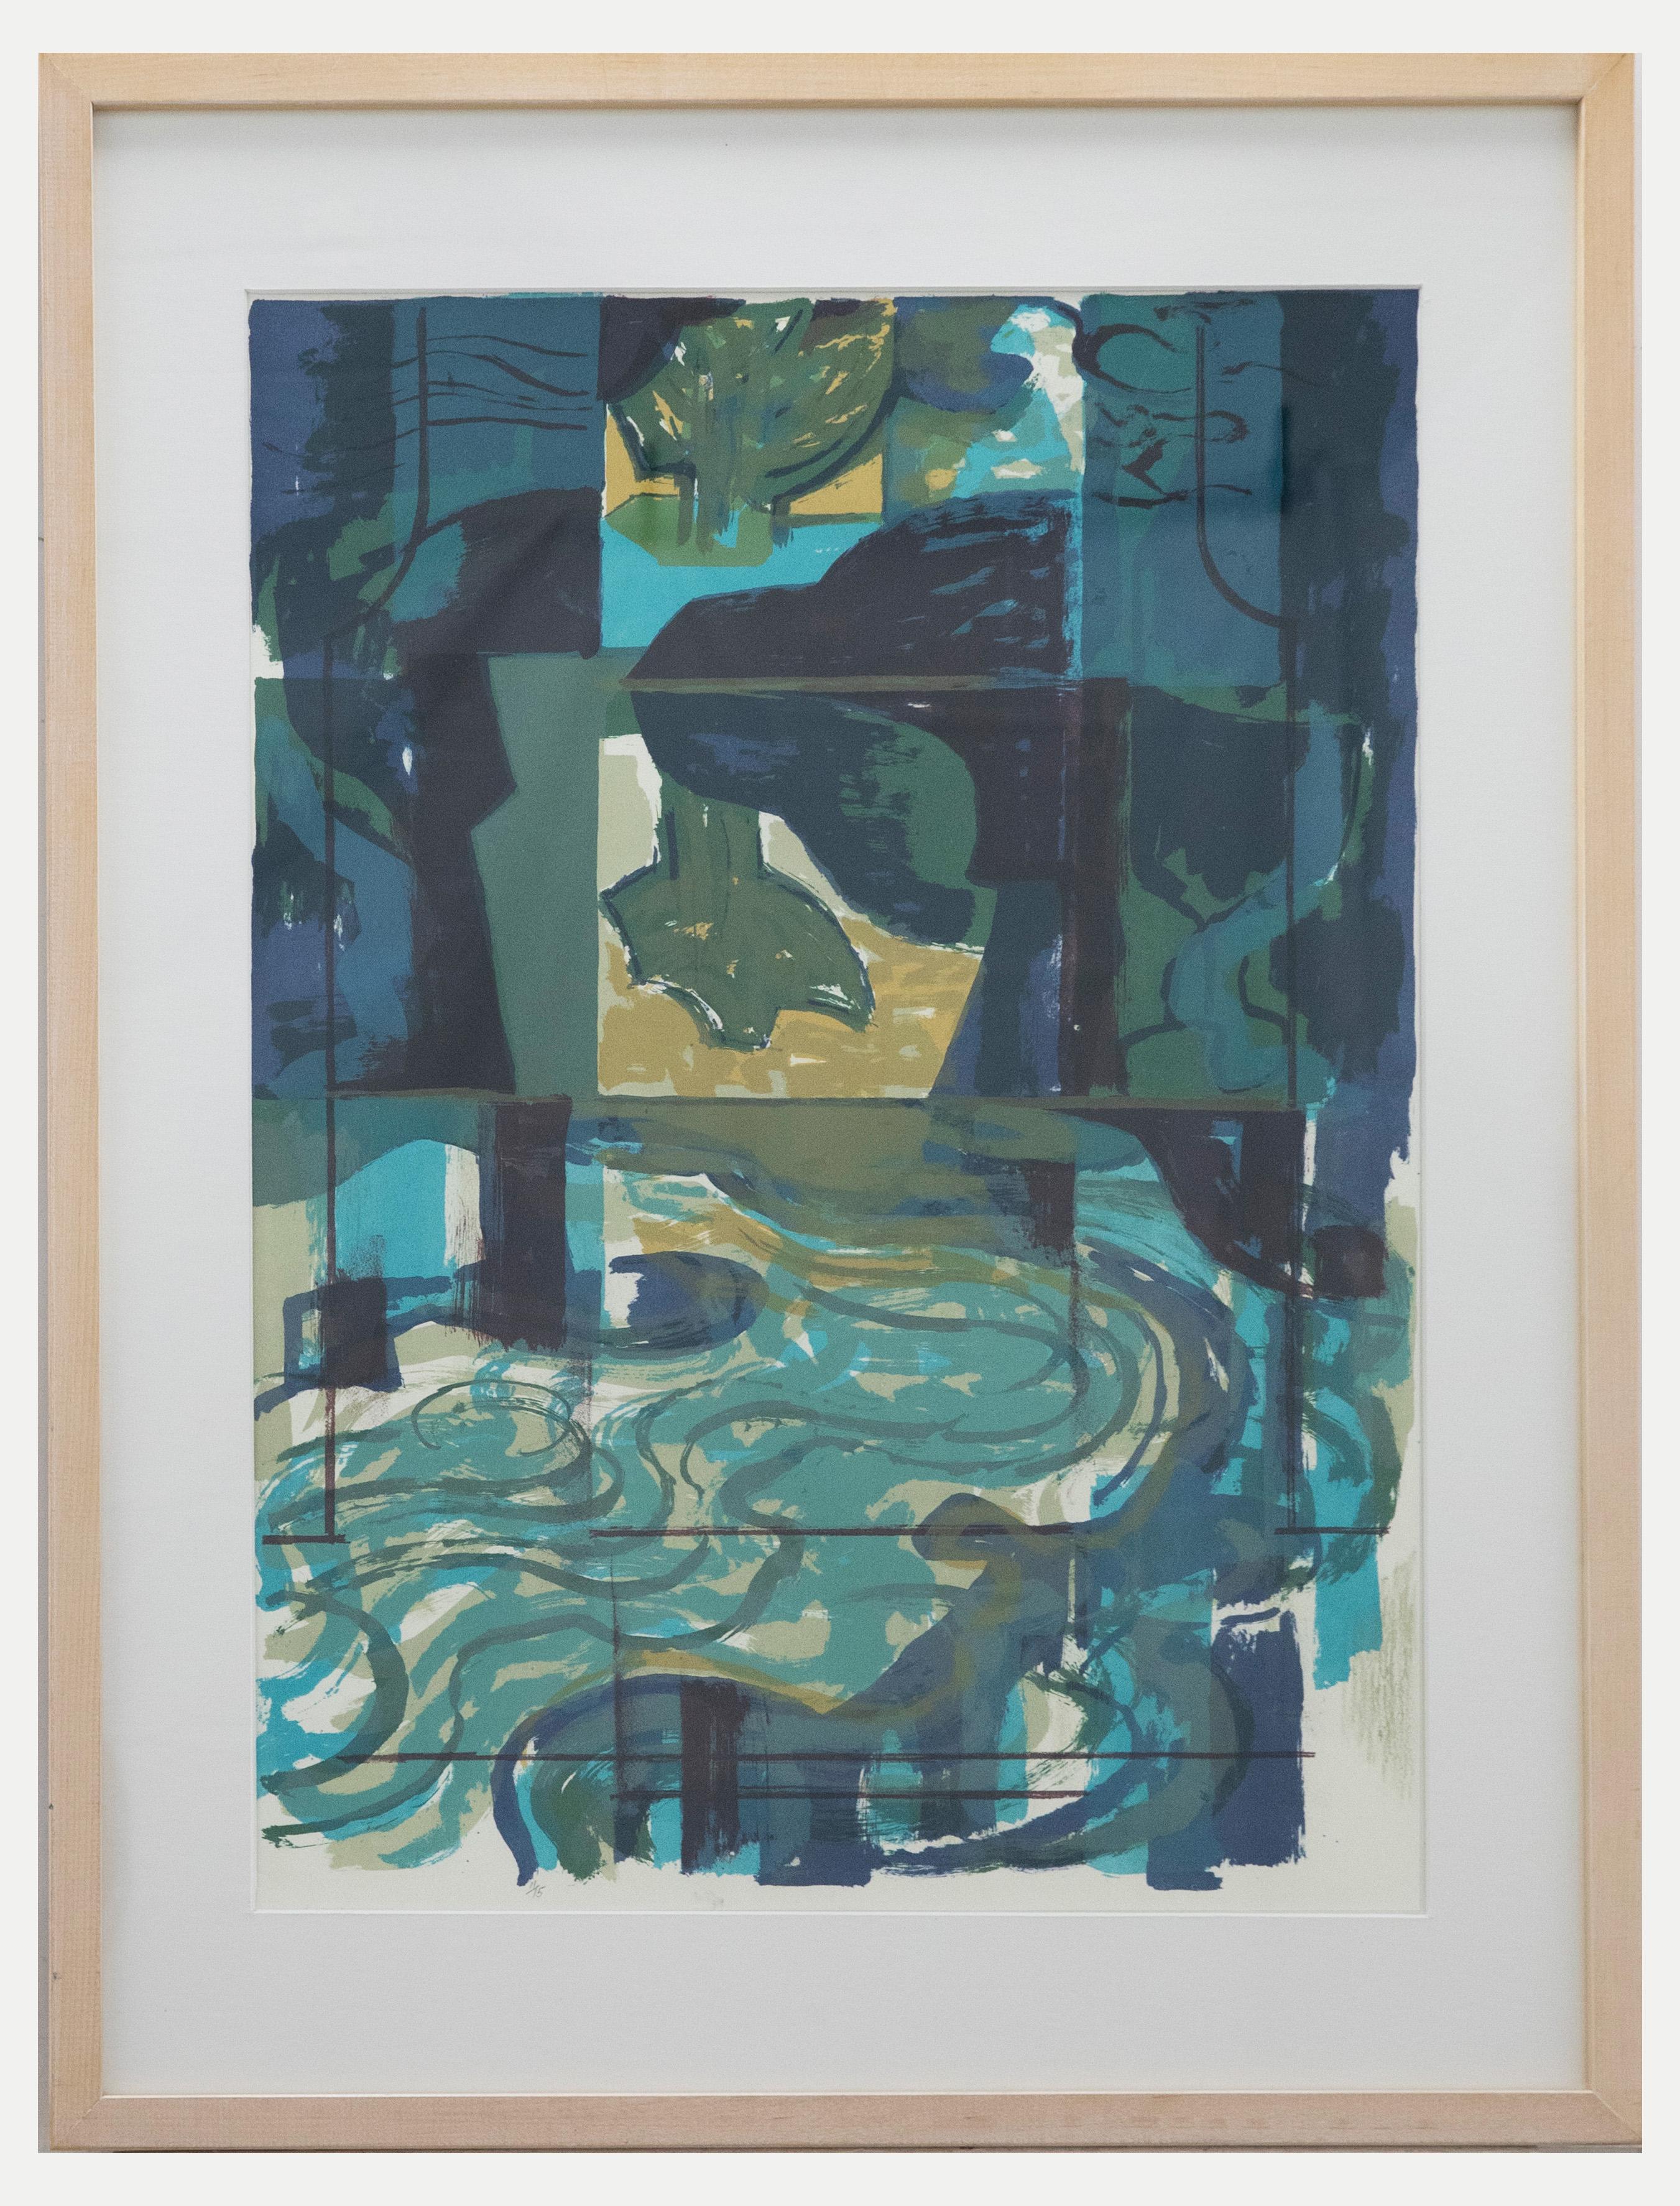 A striking abstract scene with swirling natural forms in blue and green. Inscribed 11/15. Unsigned. Presented in a contemporary wooden frame. On paper.
